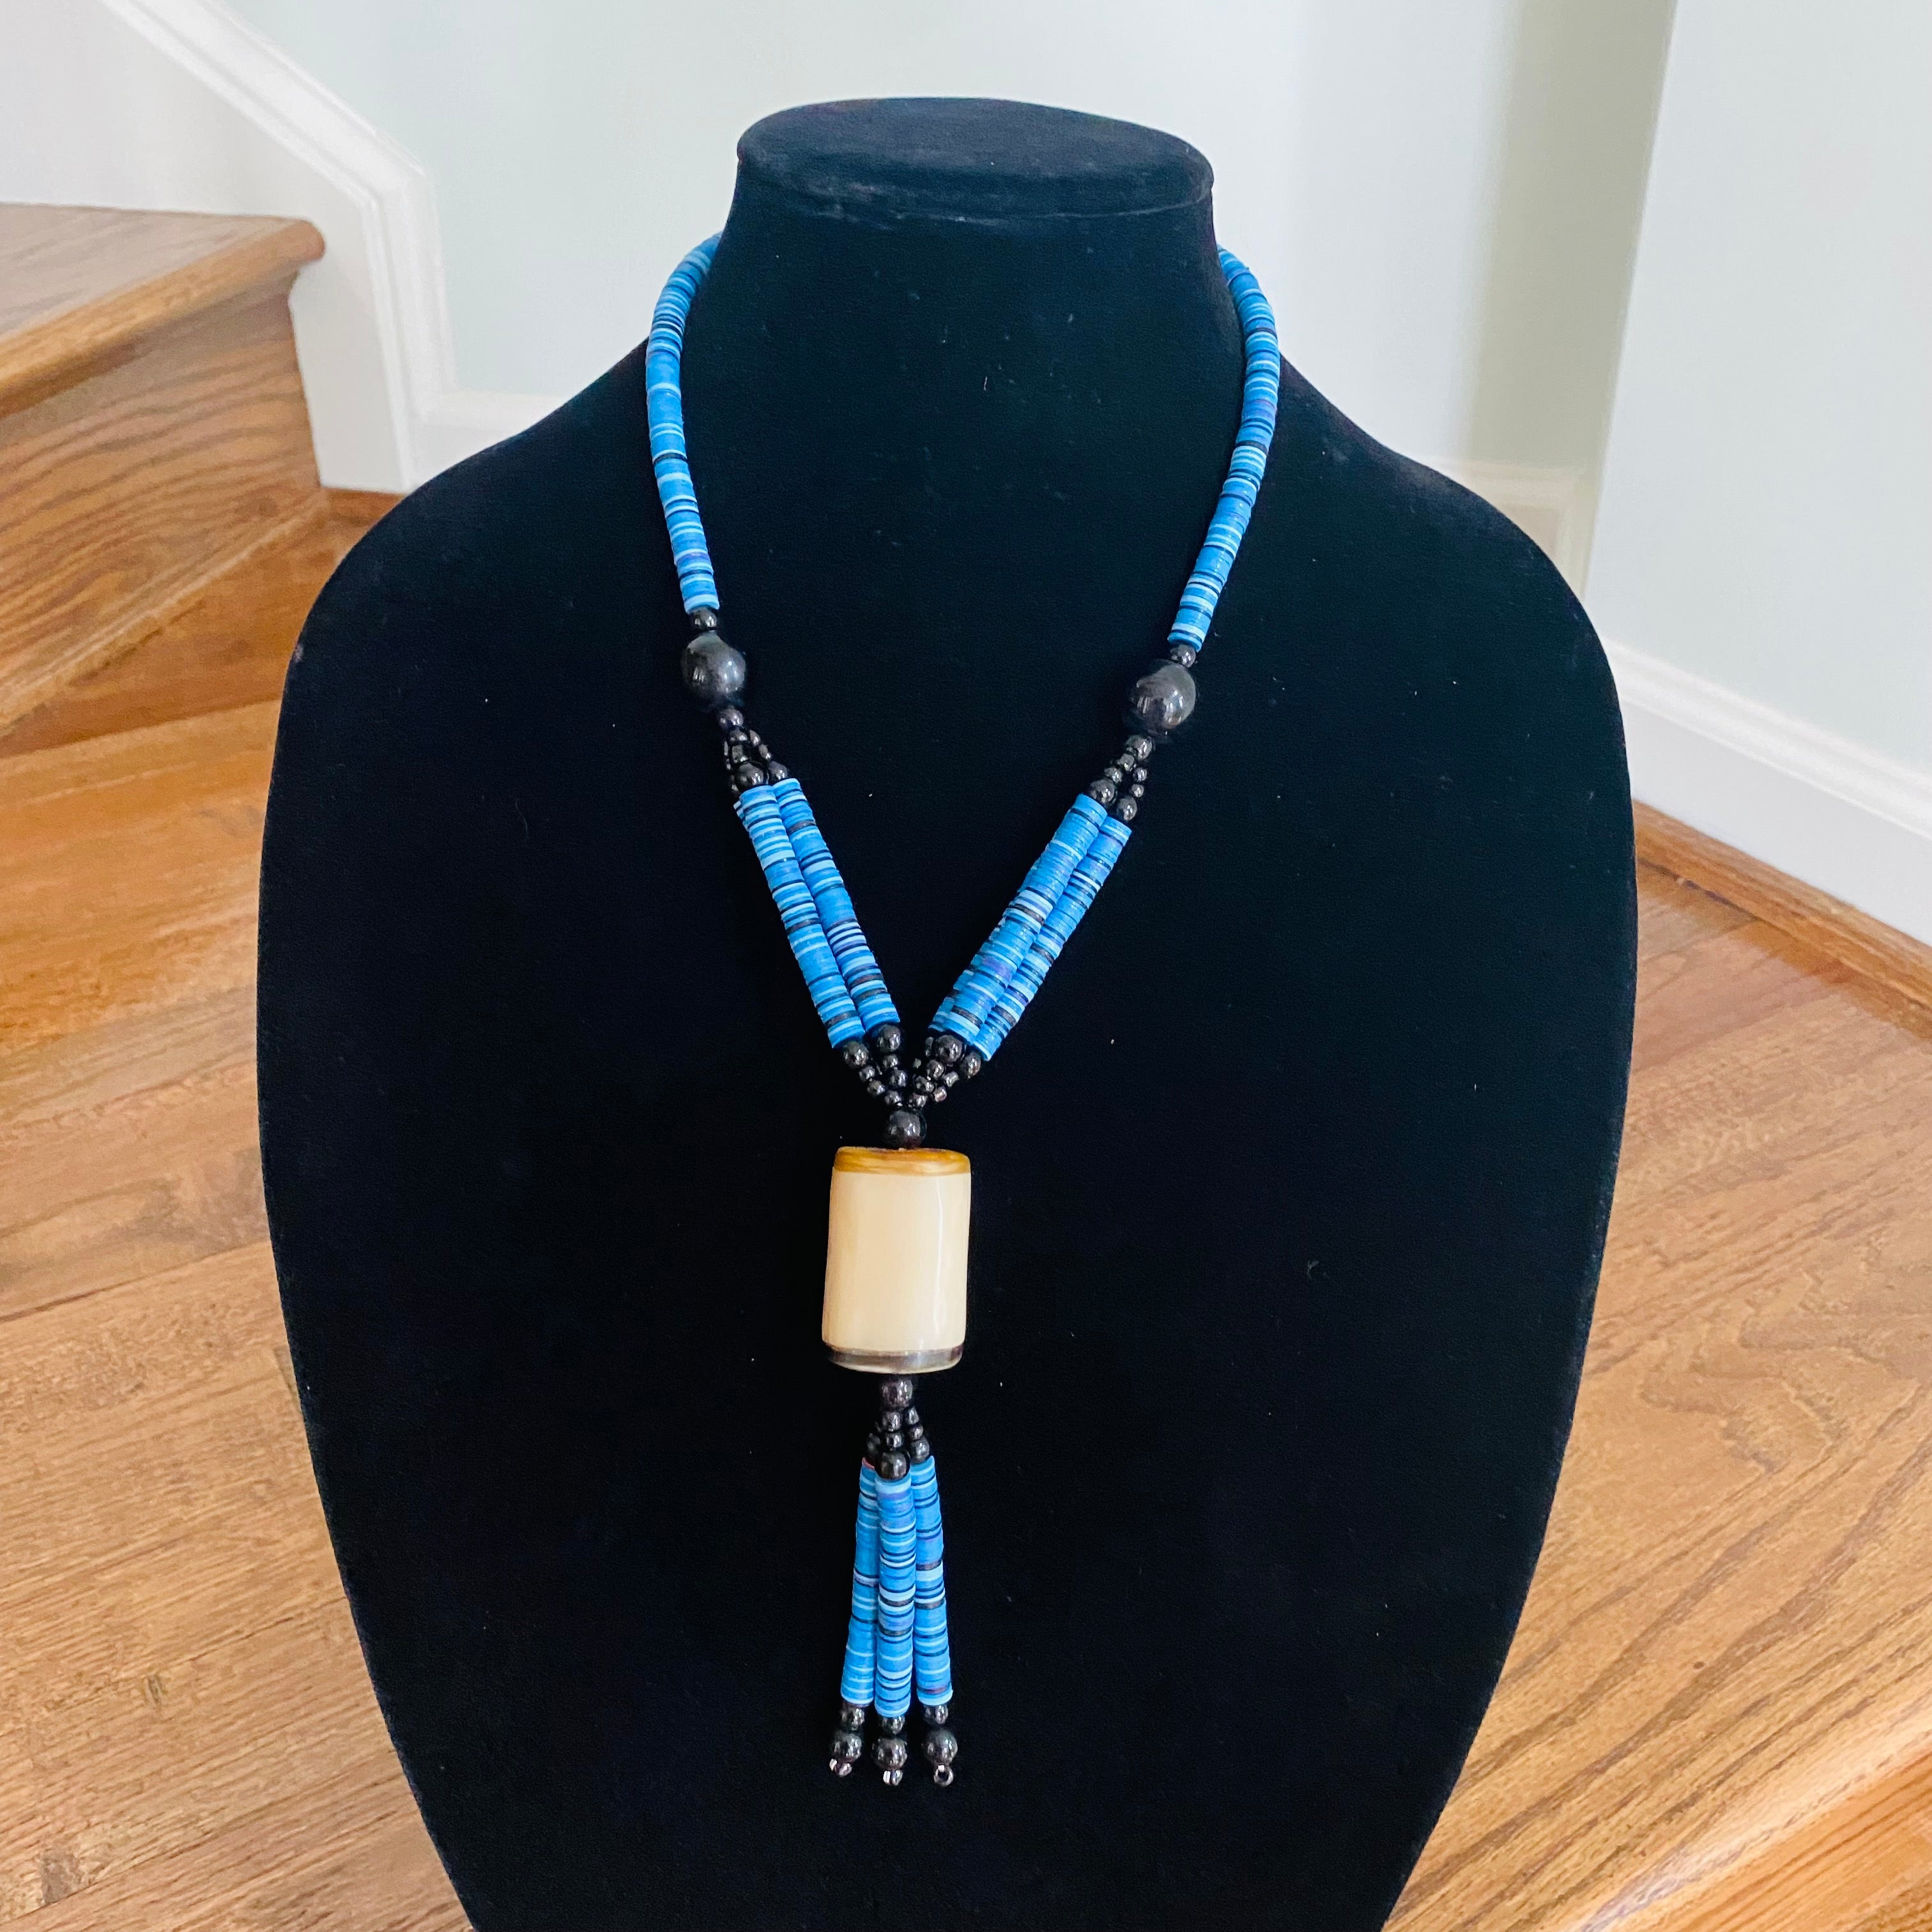 The Folami Necklaces